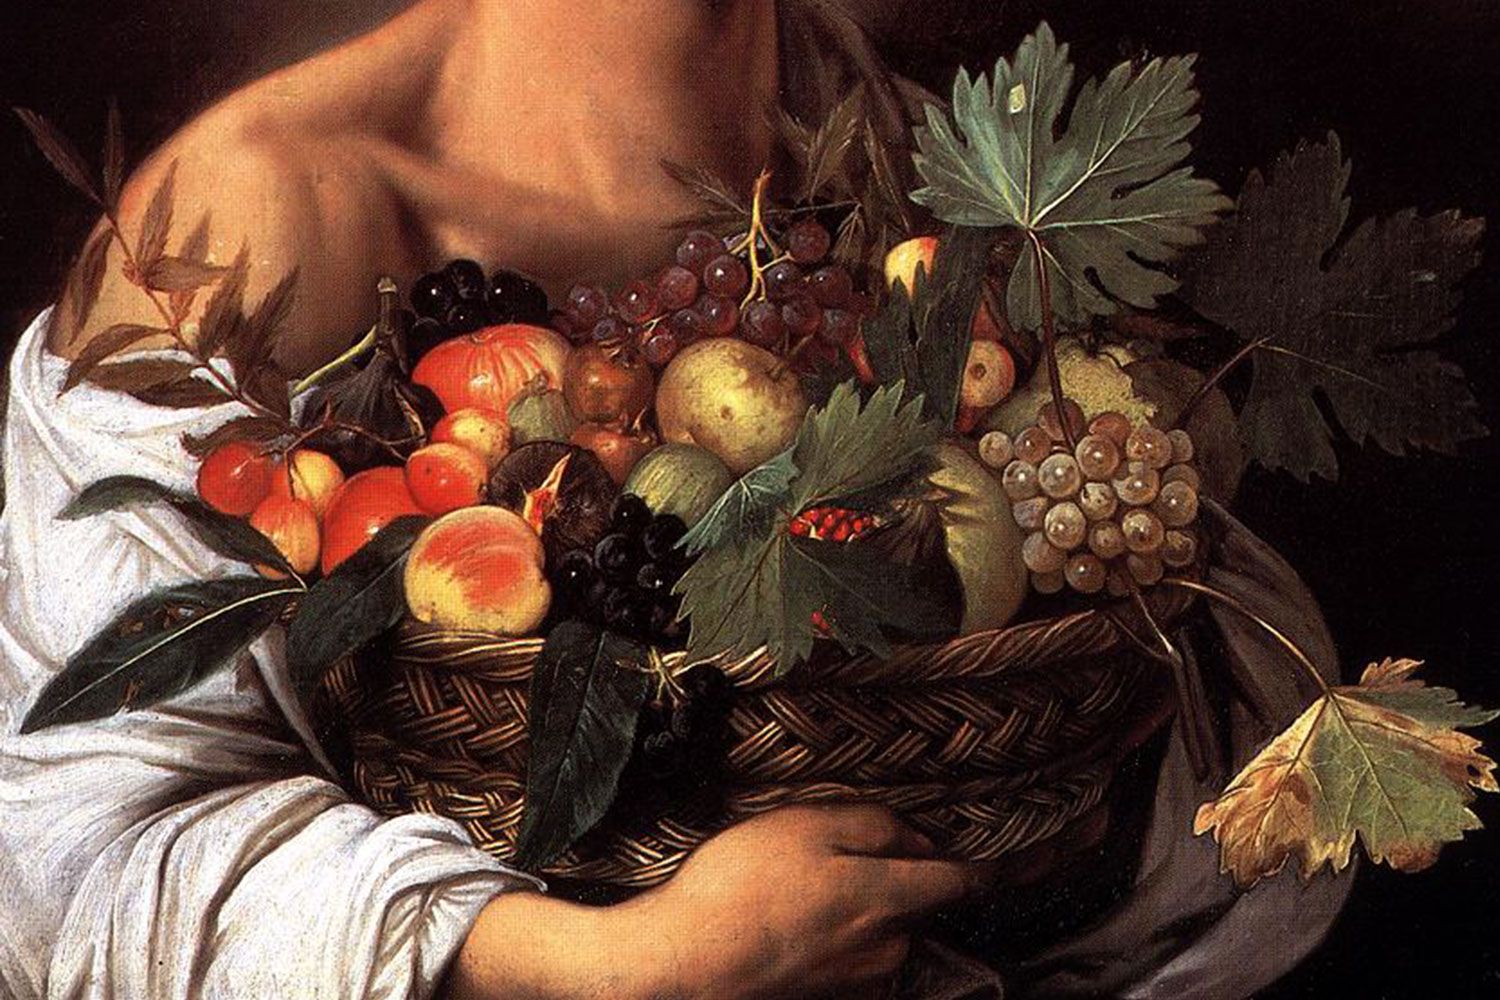 A detail of Caravaggio’s “Boy with a Basket of Fruit” (1593) Hanging in the Galleria Borghese in Rome